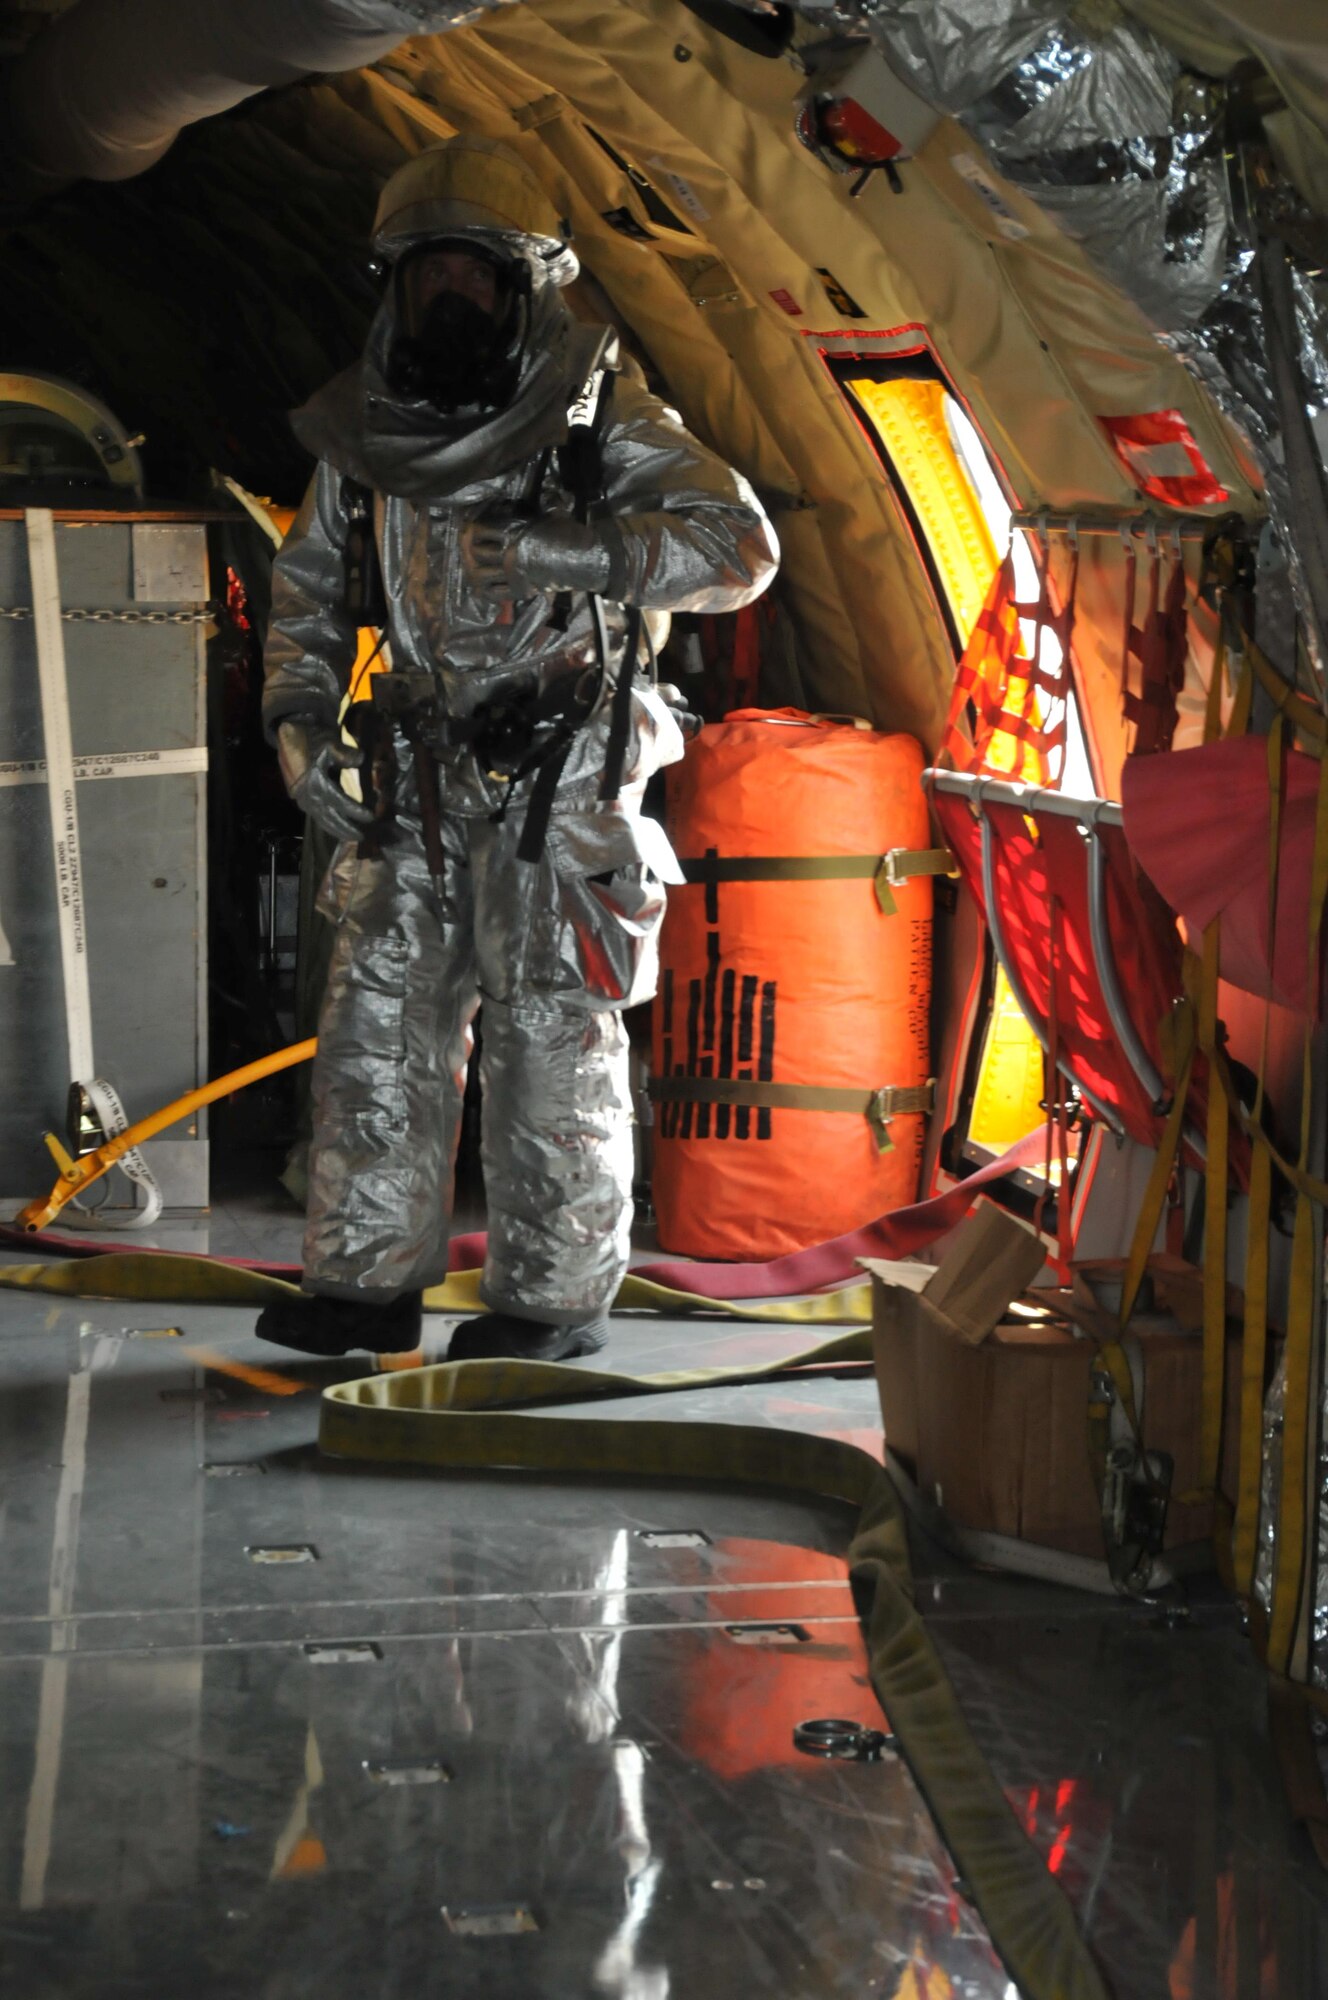 Firefighters from the 379th Expeditionary Civil Engineer Squadron arrive on the scene of a mock KC-135 Stratotanker fire Nov. 20 at Al Udeid Air Base, Qatar. Firefighters opened the access door of the plane to put out the fire and rescue an injured air crew member. (U.S. Air Force photo by Tech. Sgt. Terrica Y. Jones/Released)